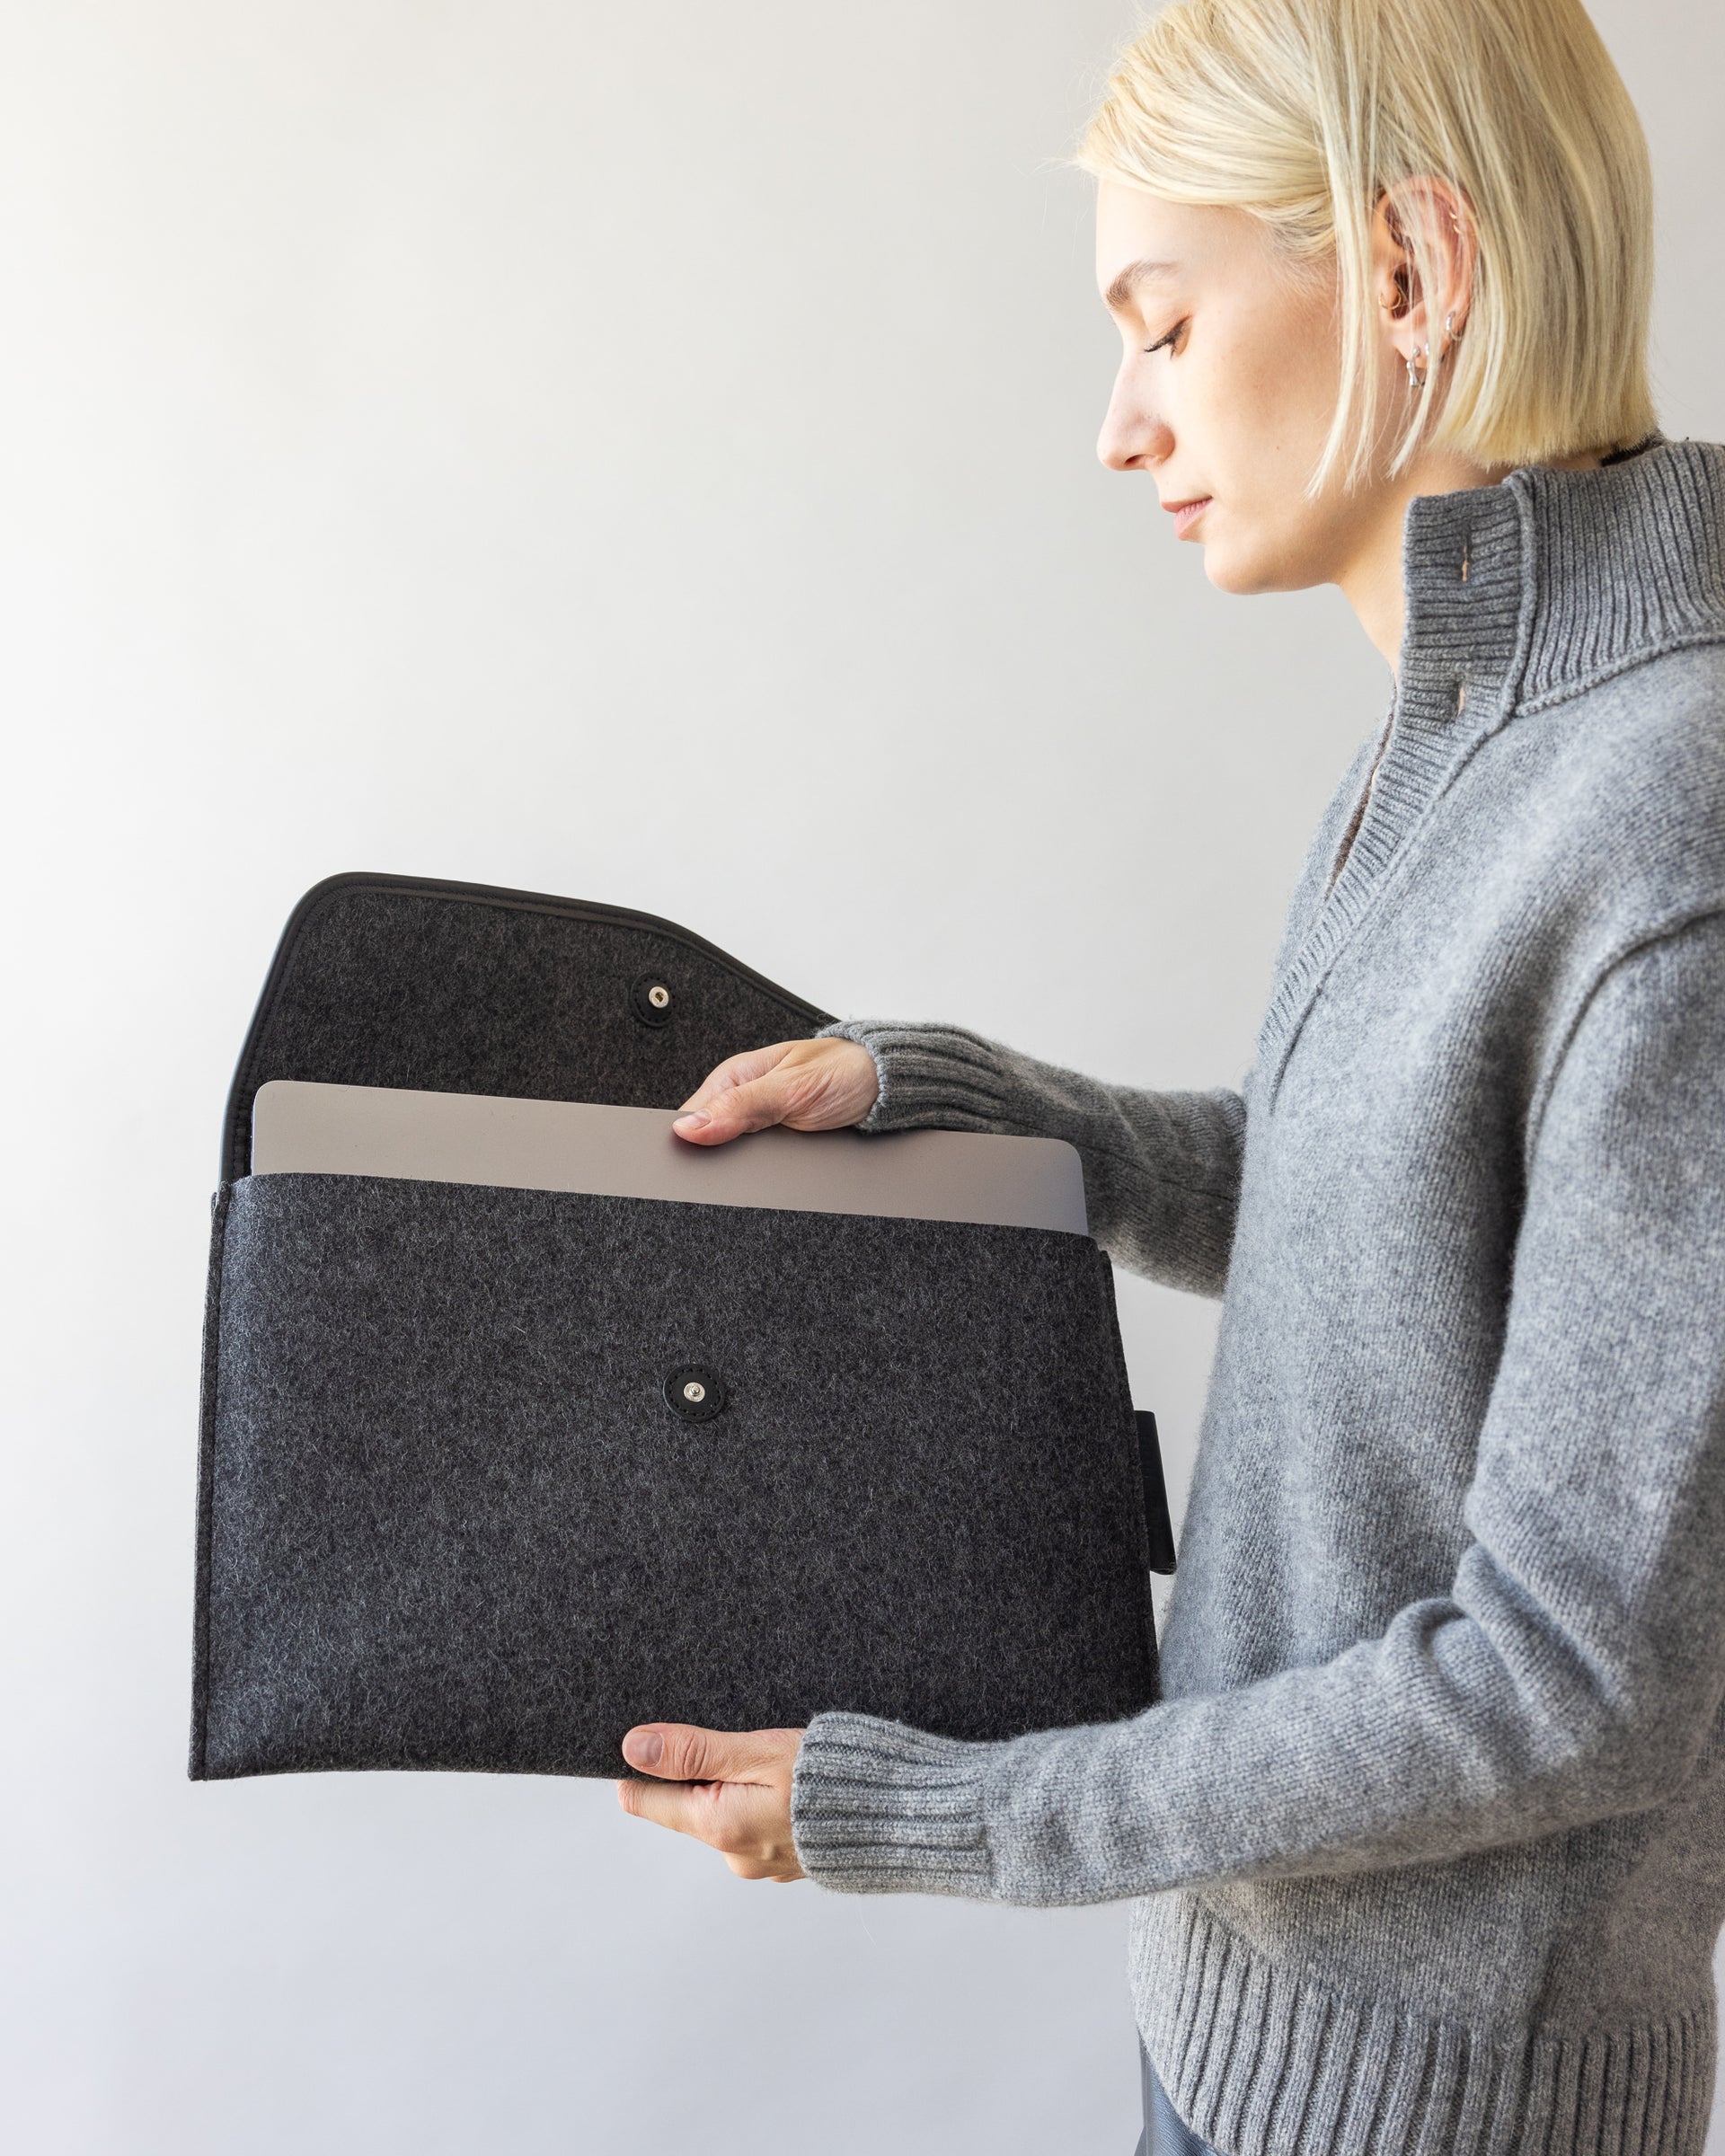 Stylish woman is pulling a silver colored laptop out of Envelope Merino Wool 16" Tech Sleeve in charcoal